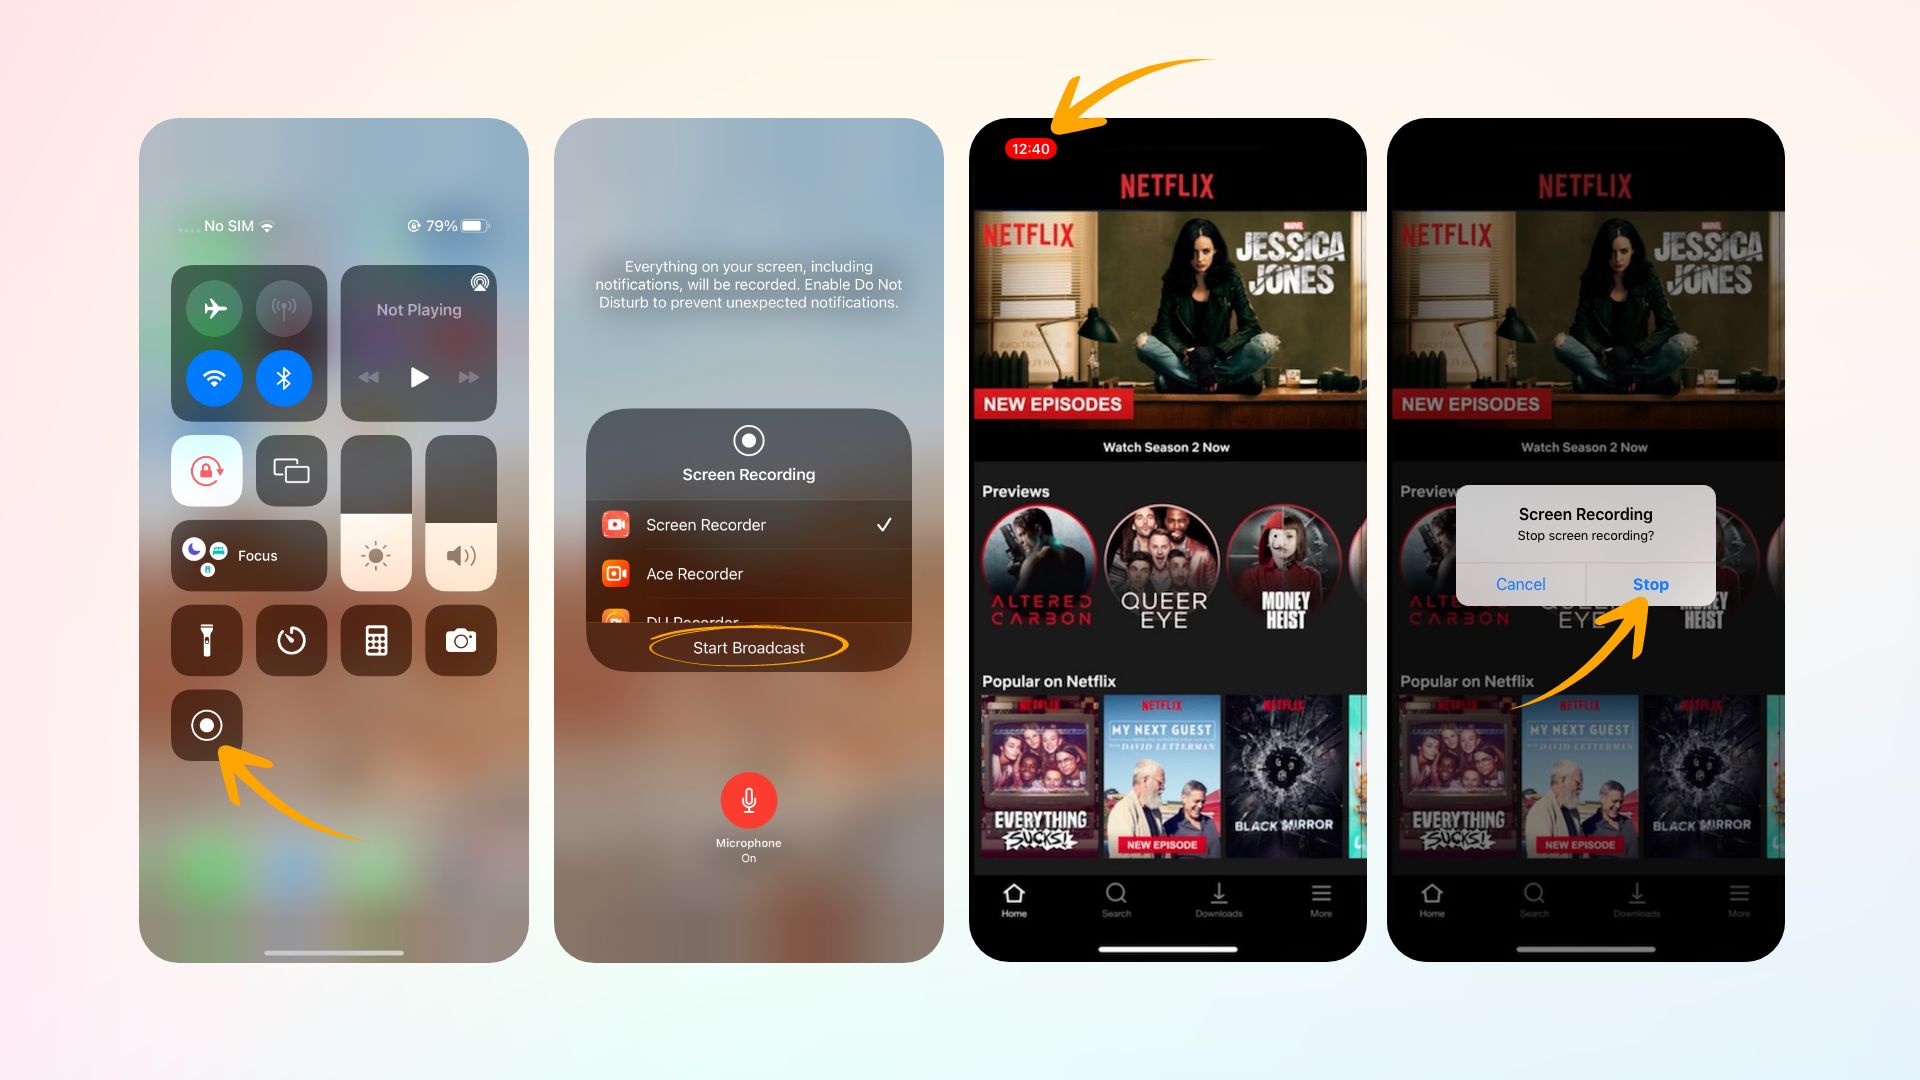 how to screen record Netflix on iPhone using its built-in screen recorder